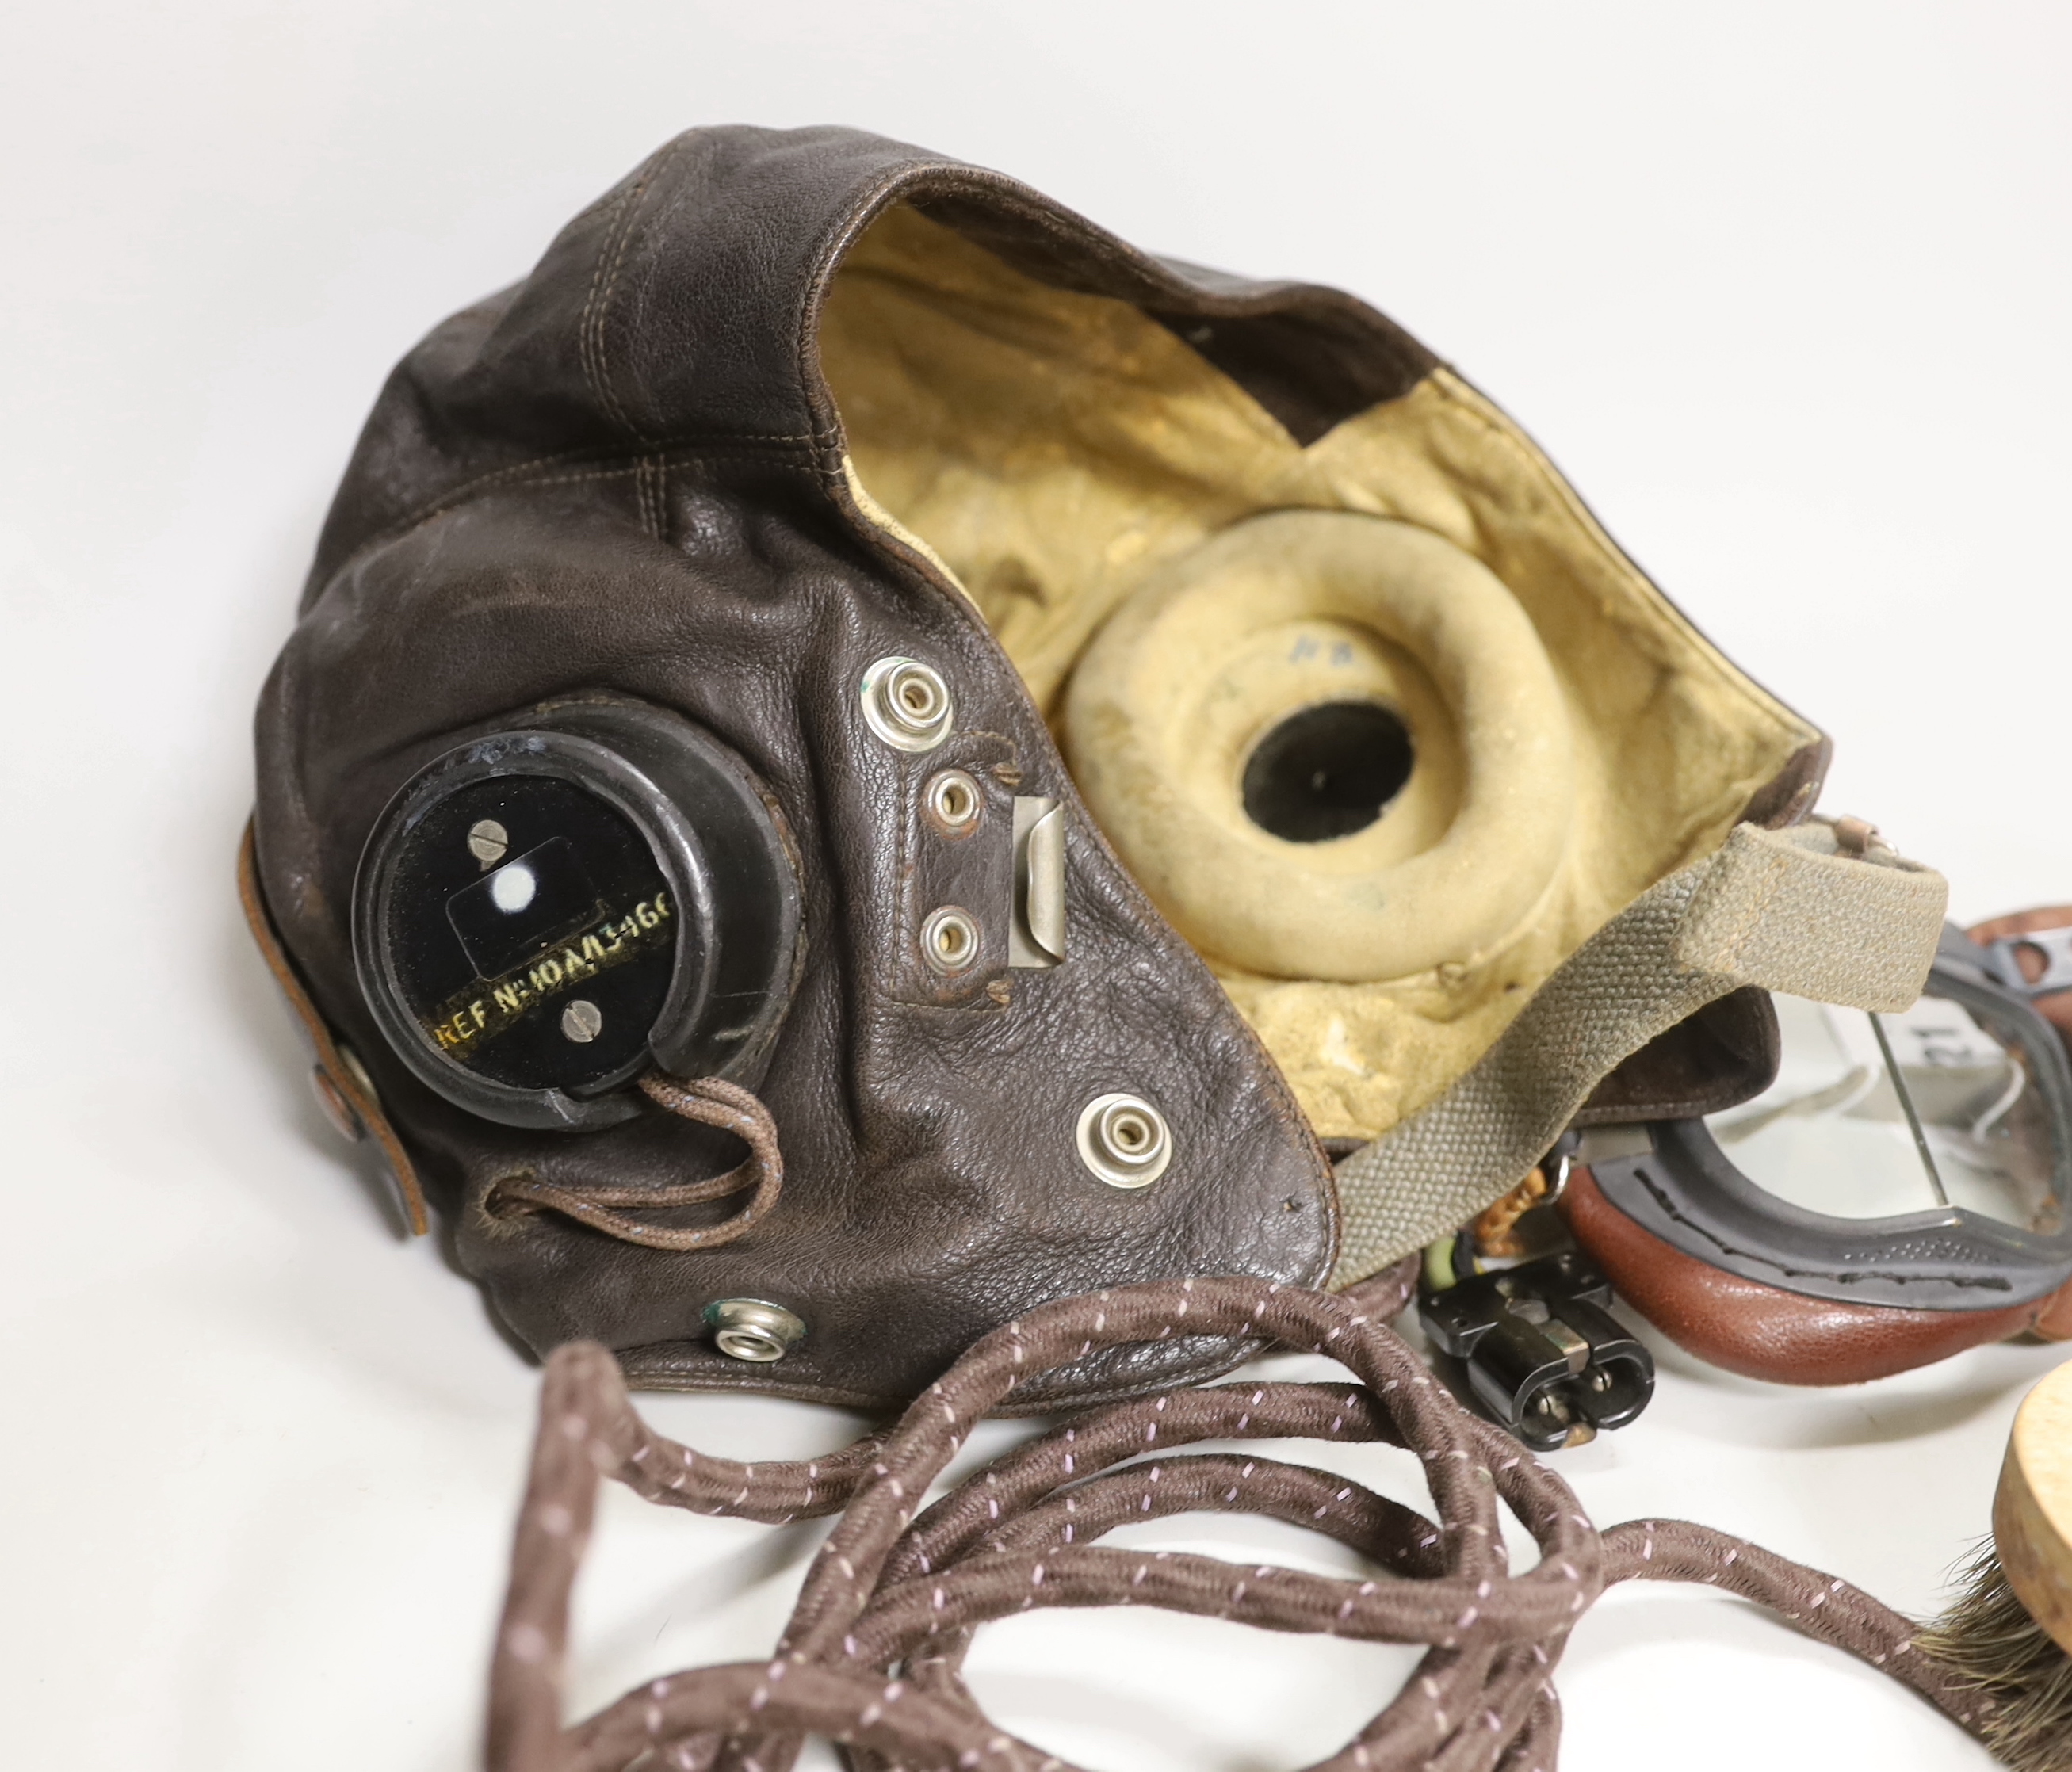 A WWII RAF flying helmet with speaker earpieces and original cables and plugs, Ref No.10A/13466, initialled in pen ‘HB’ for H. Brown 1320701, together with flying goggles and a contemporary clothes brush, provenance - by